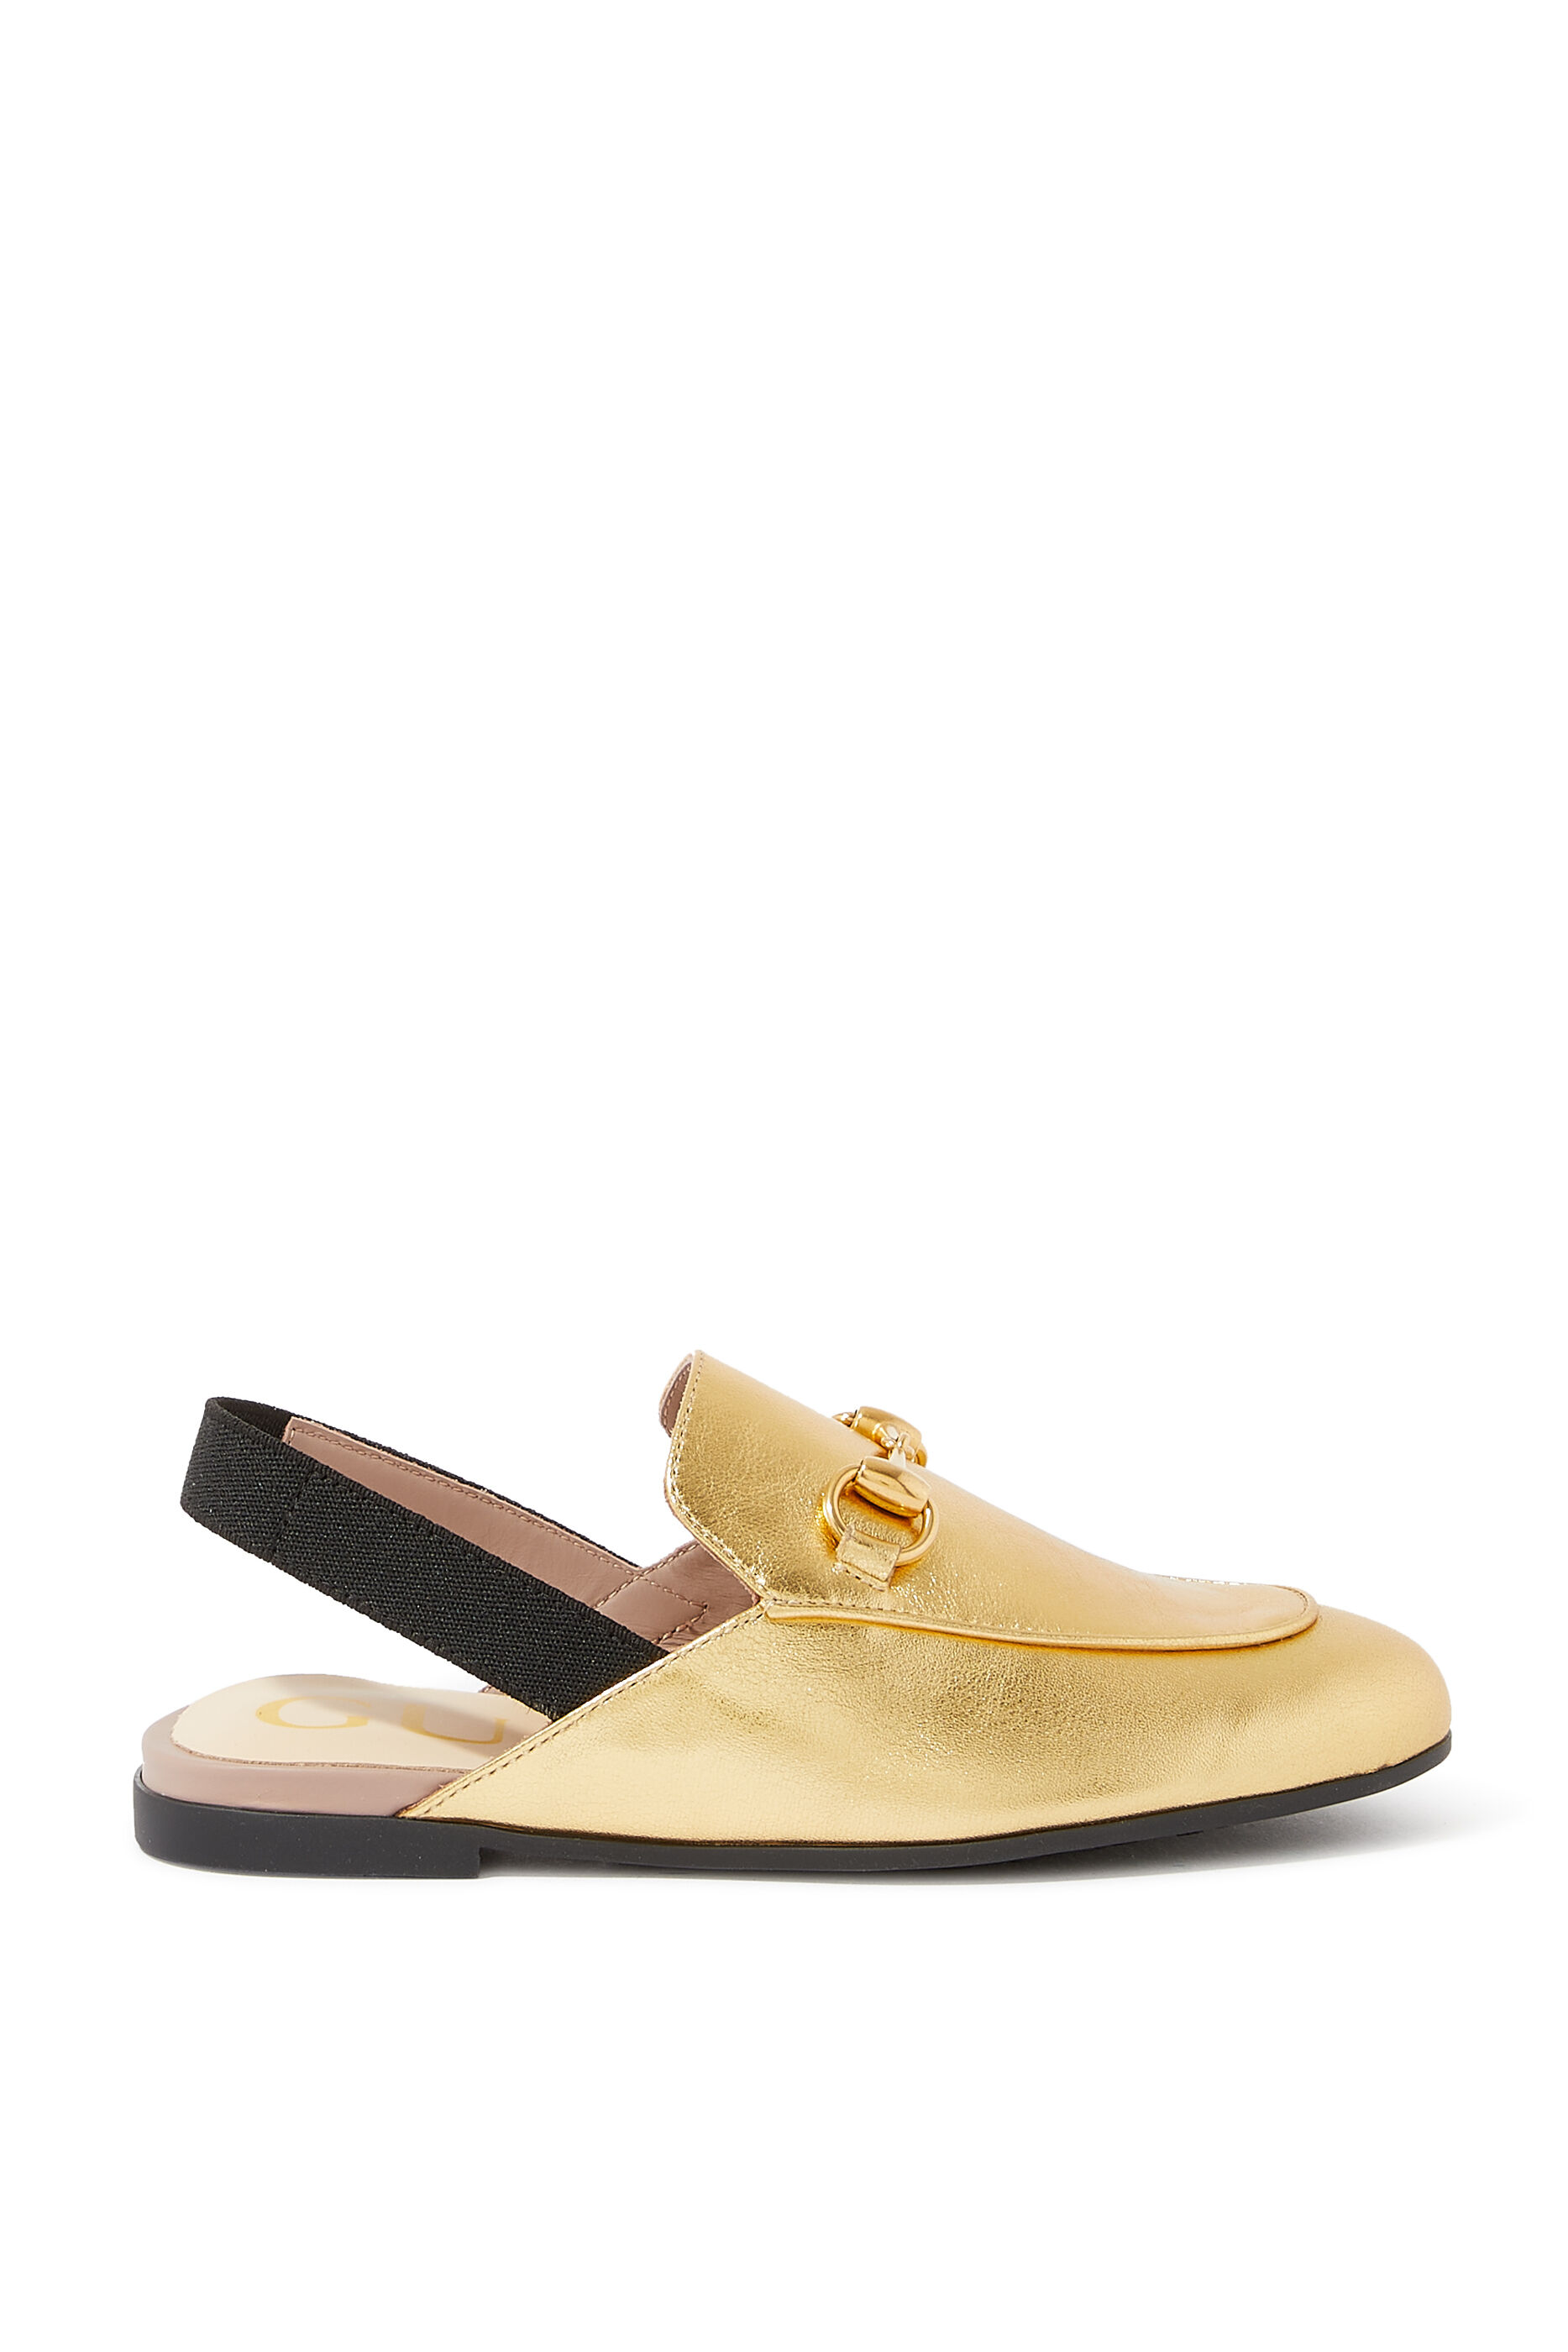 gucci princetown gold mules